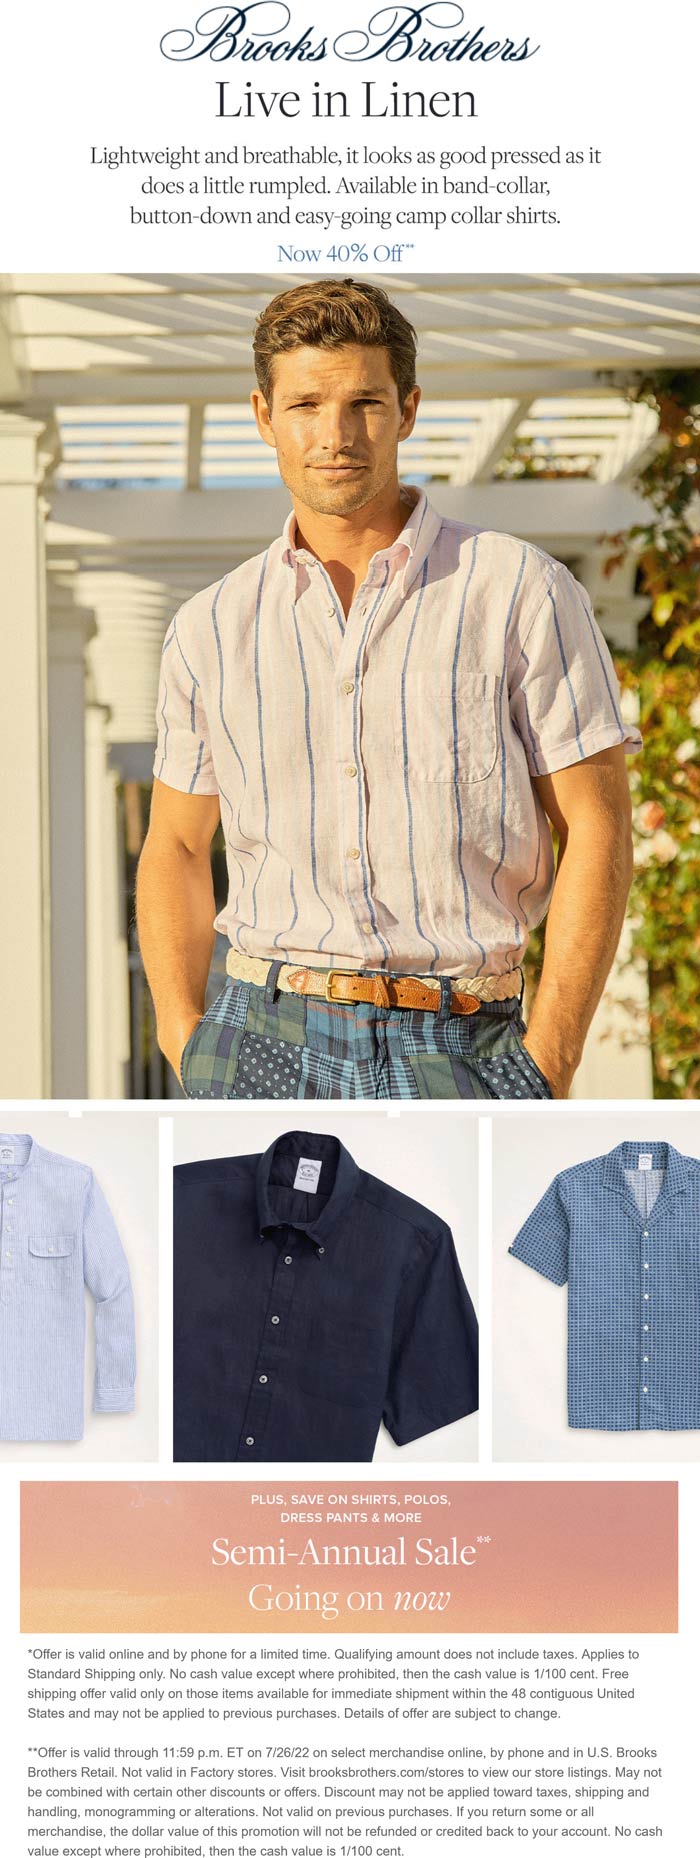 Brooks Brothers stores Coupon  40% off linen shirts at Brooks Brothers #brooksbrothers 